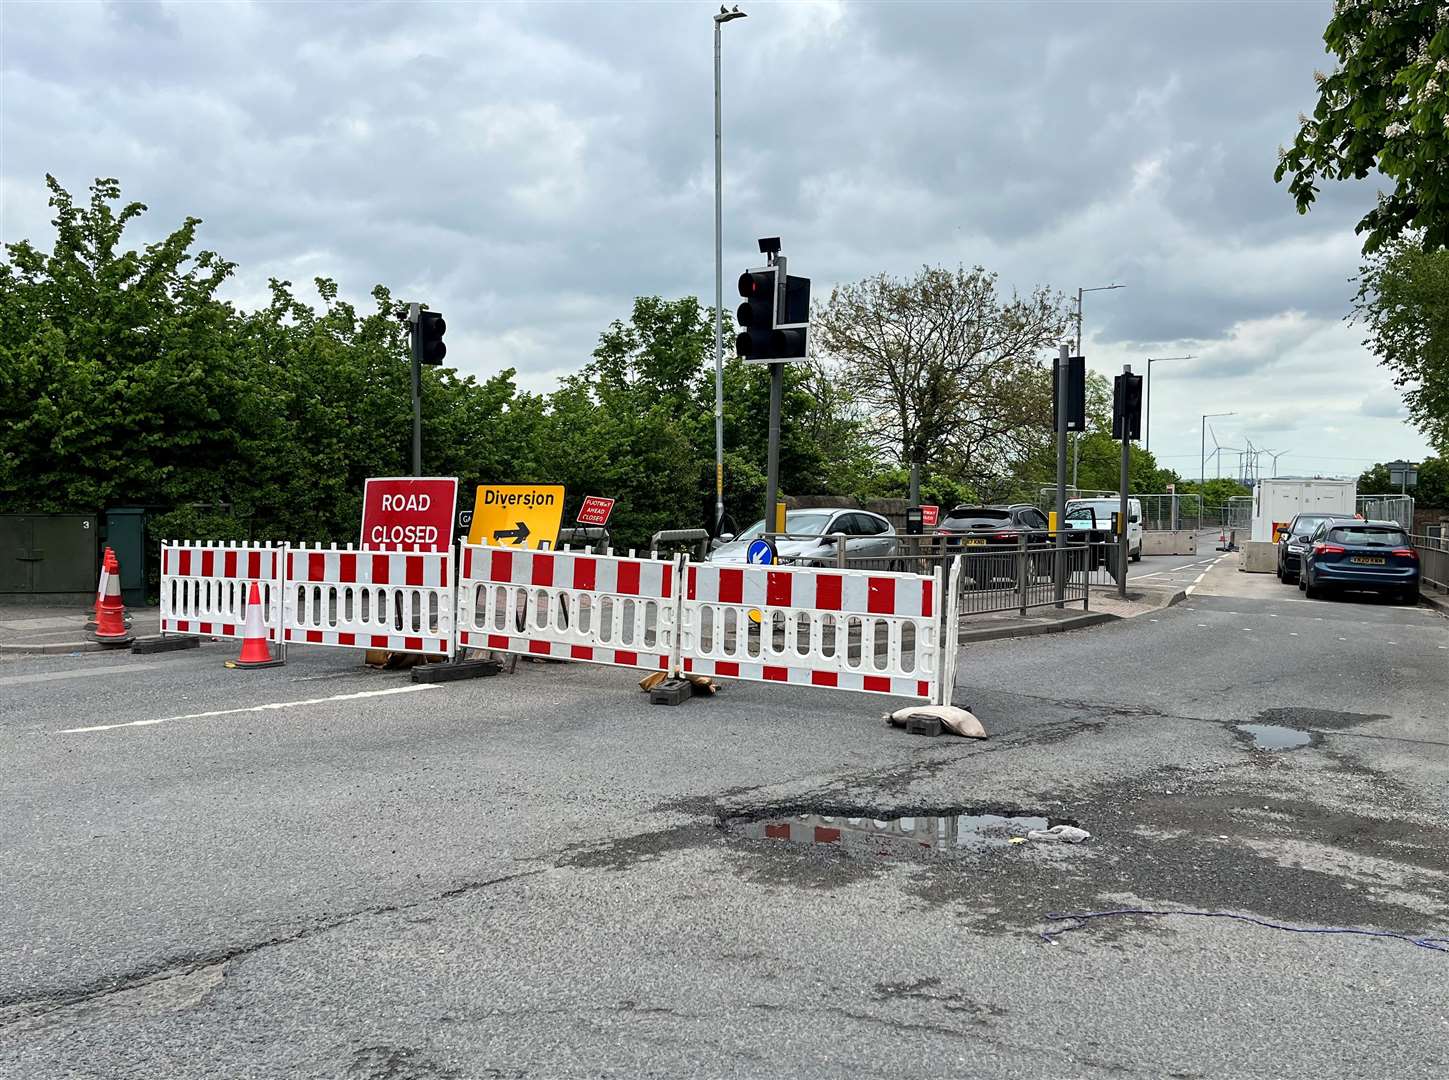 The closure at the top of Galley Hill Road in Swanscombe